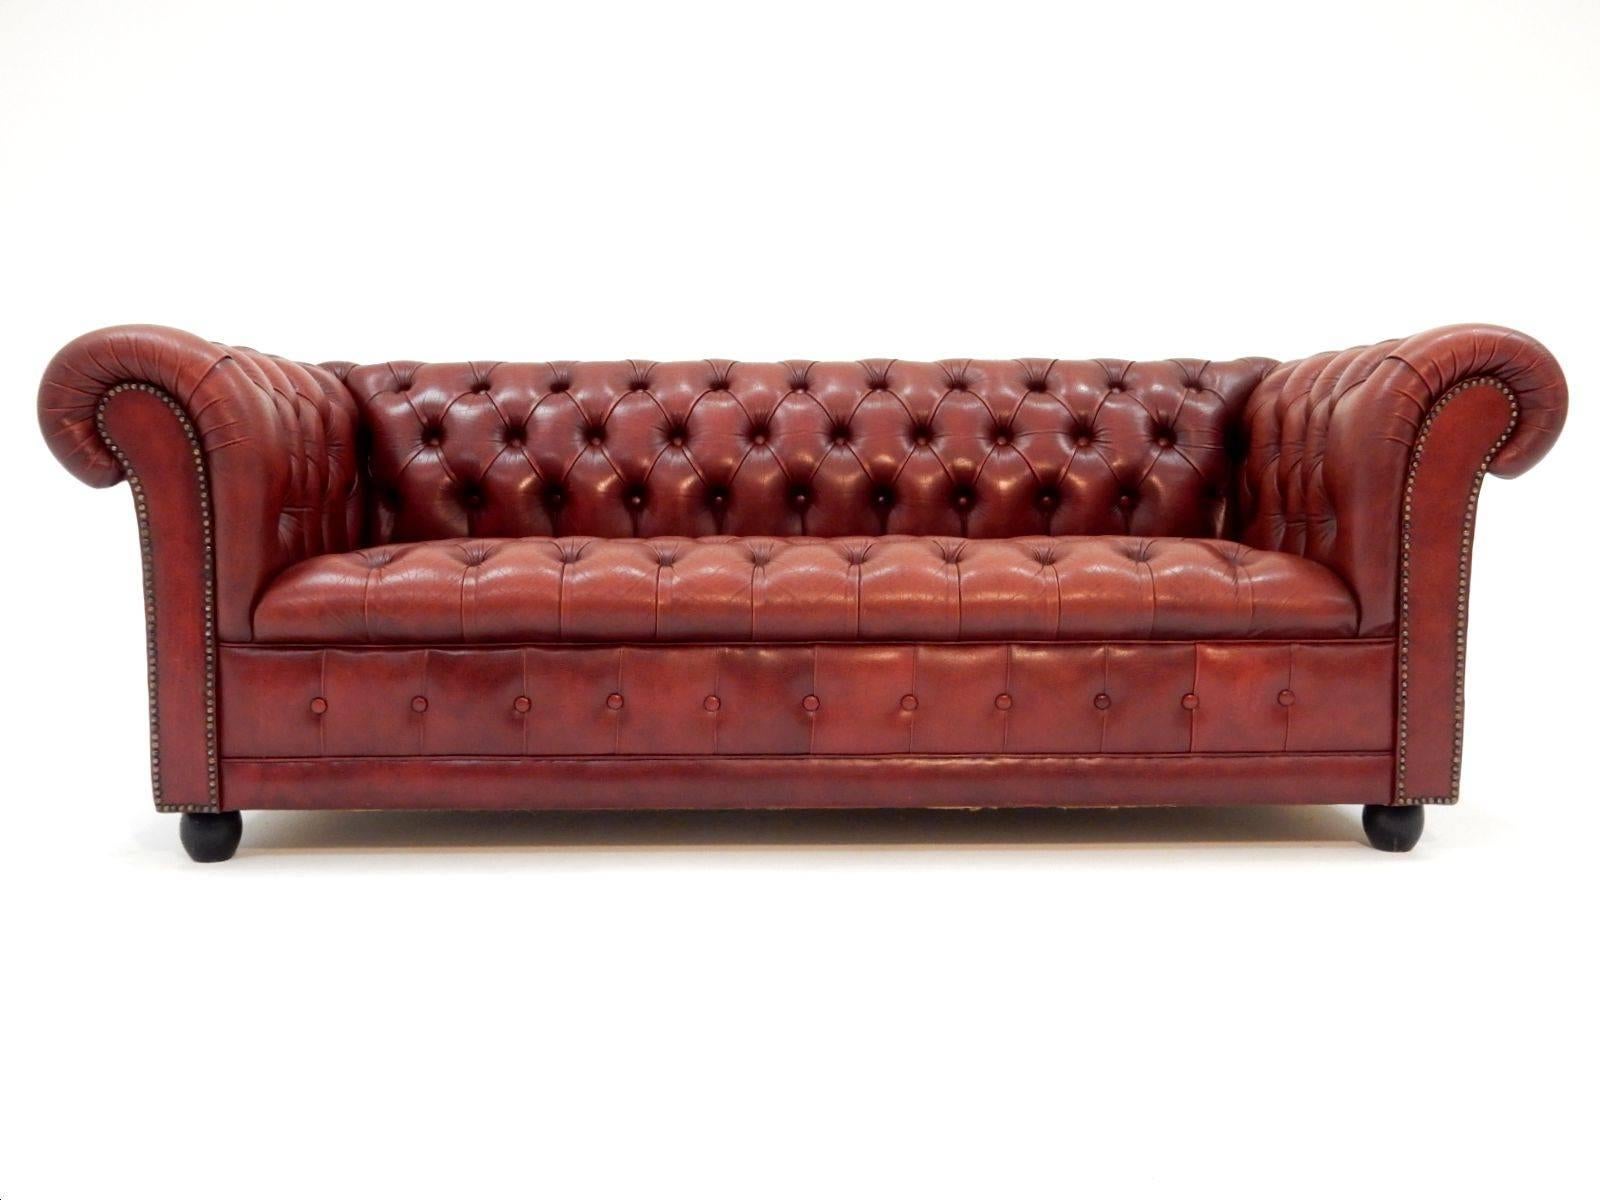 20th Century Fabulous Tufted Oxblood Leather British Chesterfield Sofa